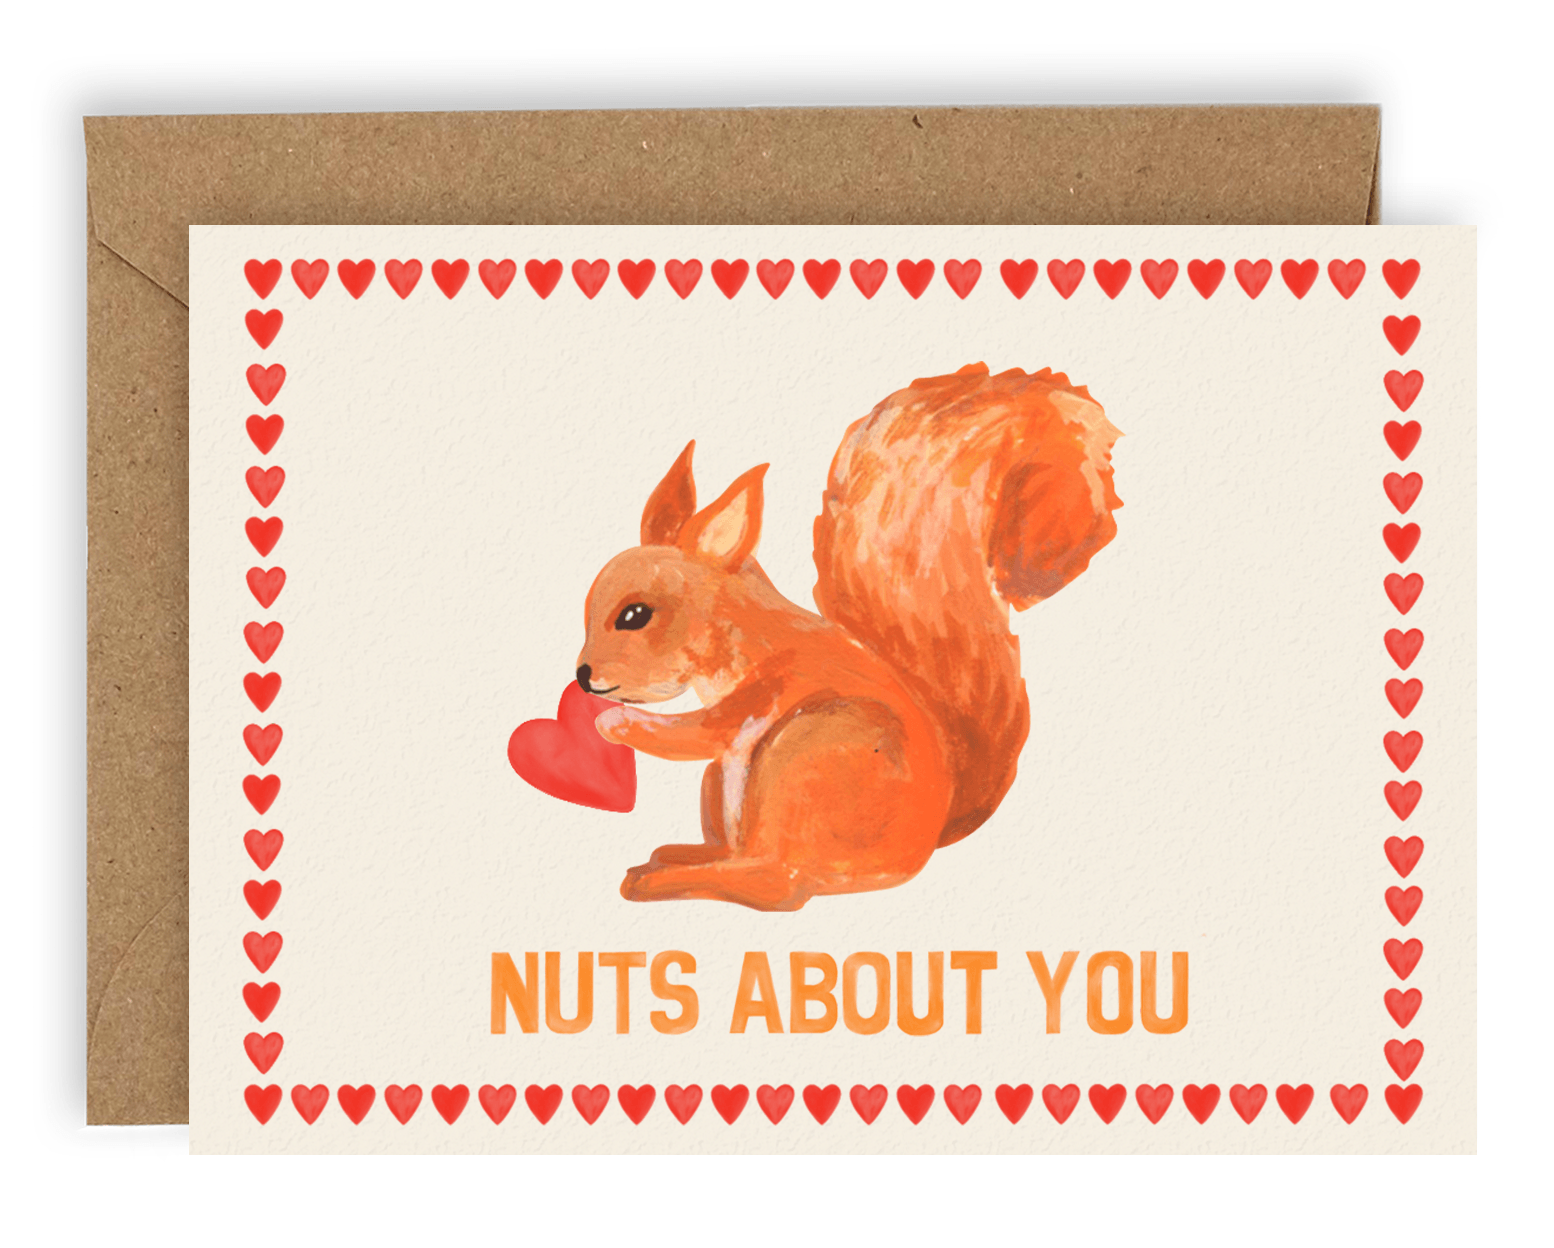 A large squirrel holding a heart positioned above the words "nuts about you" in orange font. Red hearts line each side of the card. Shown with kraft envelope.